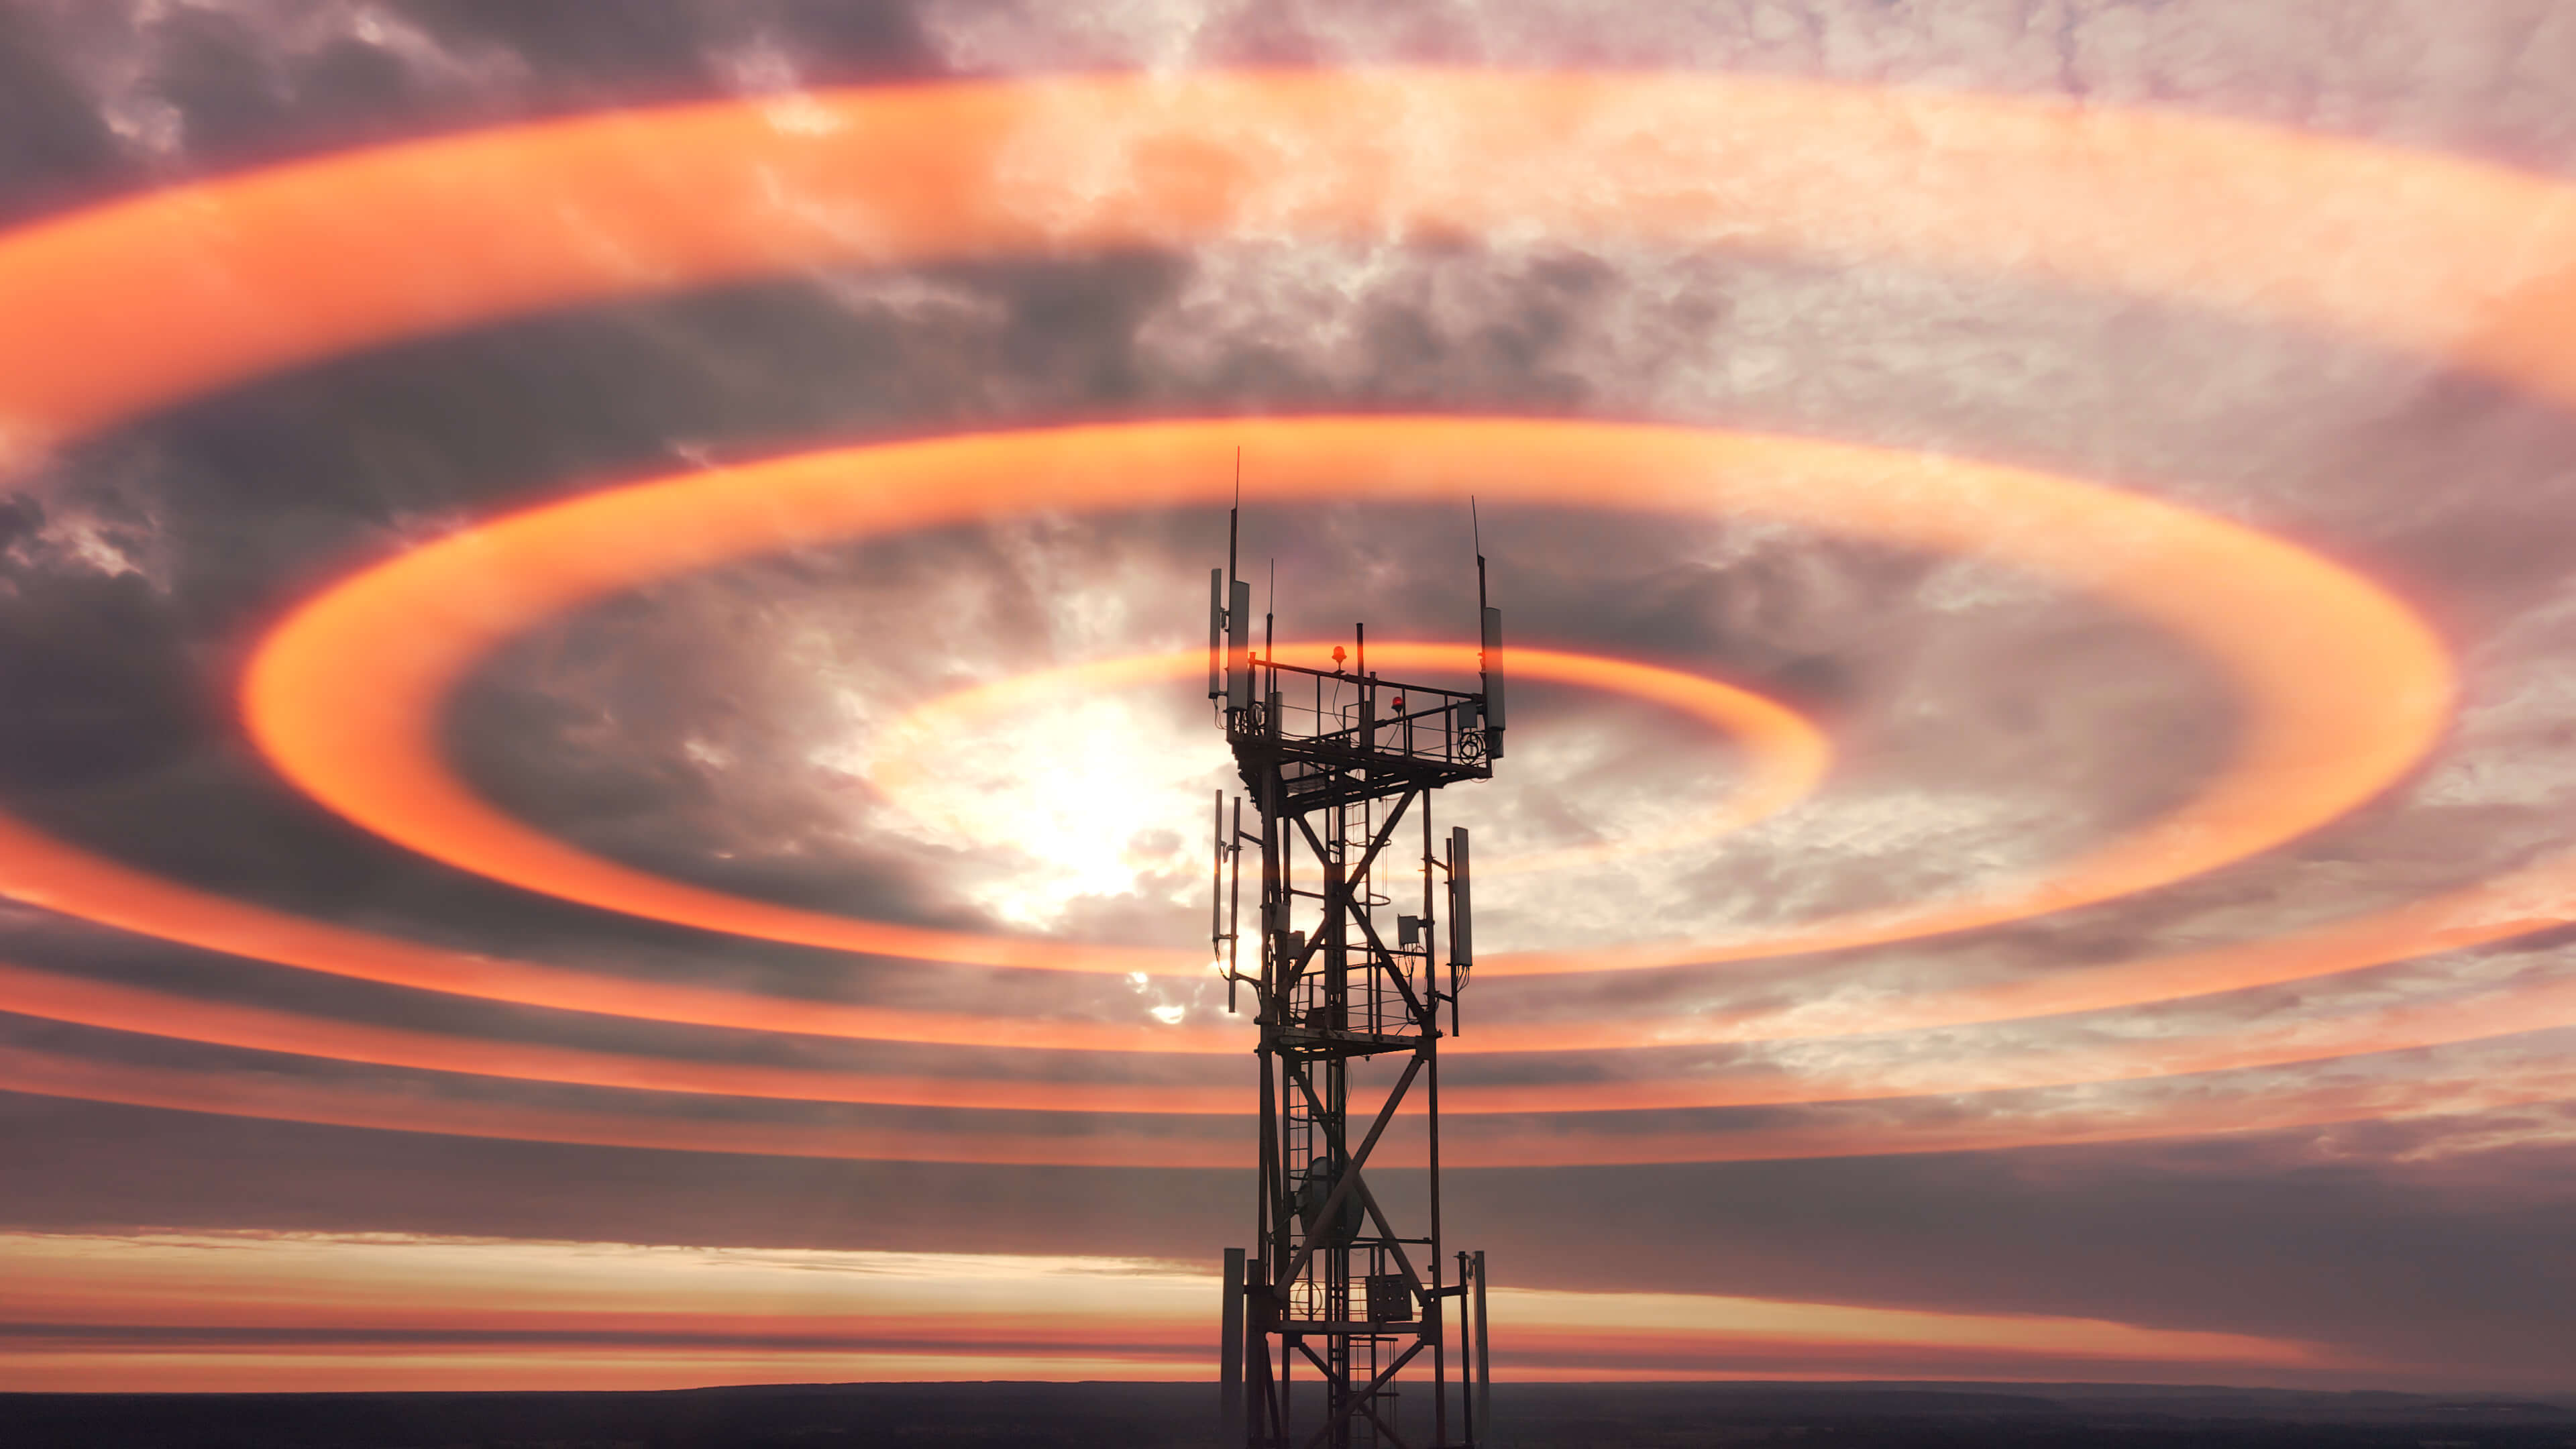 Vodafone collaborating with AccelerComm on advanced 5G physical layer IP for Open RAN systems